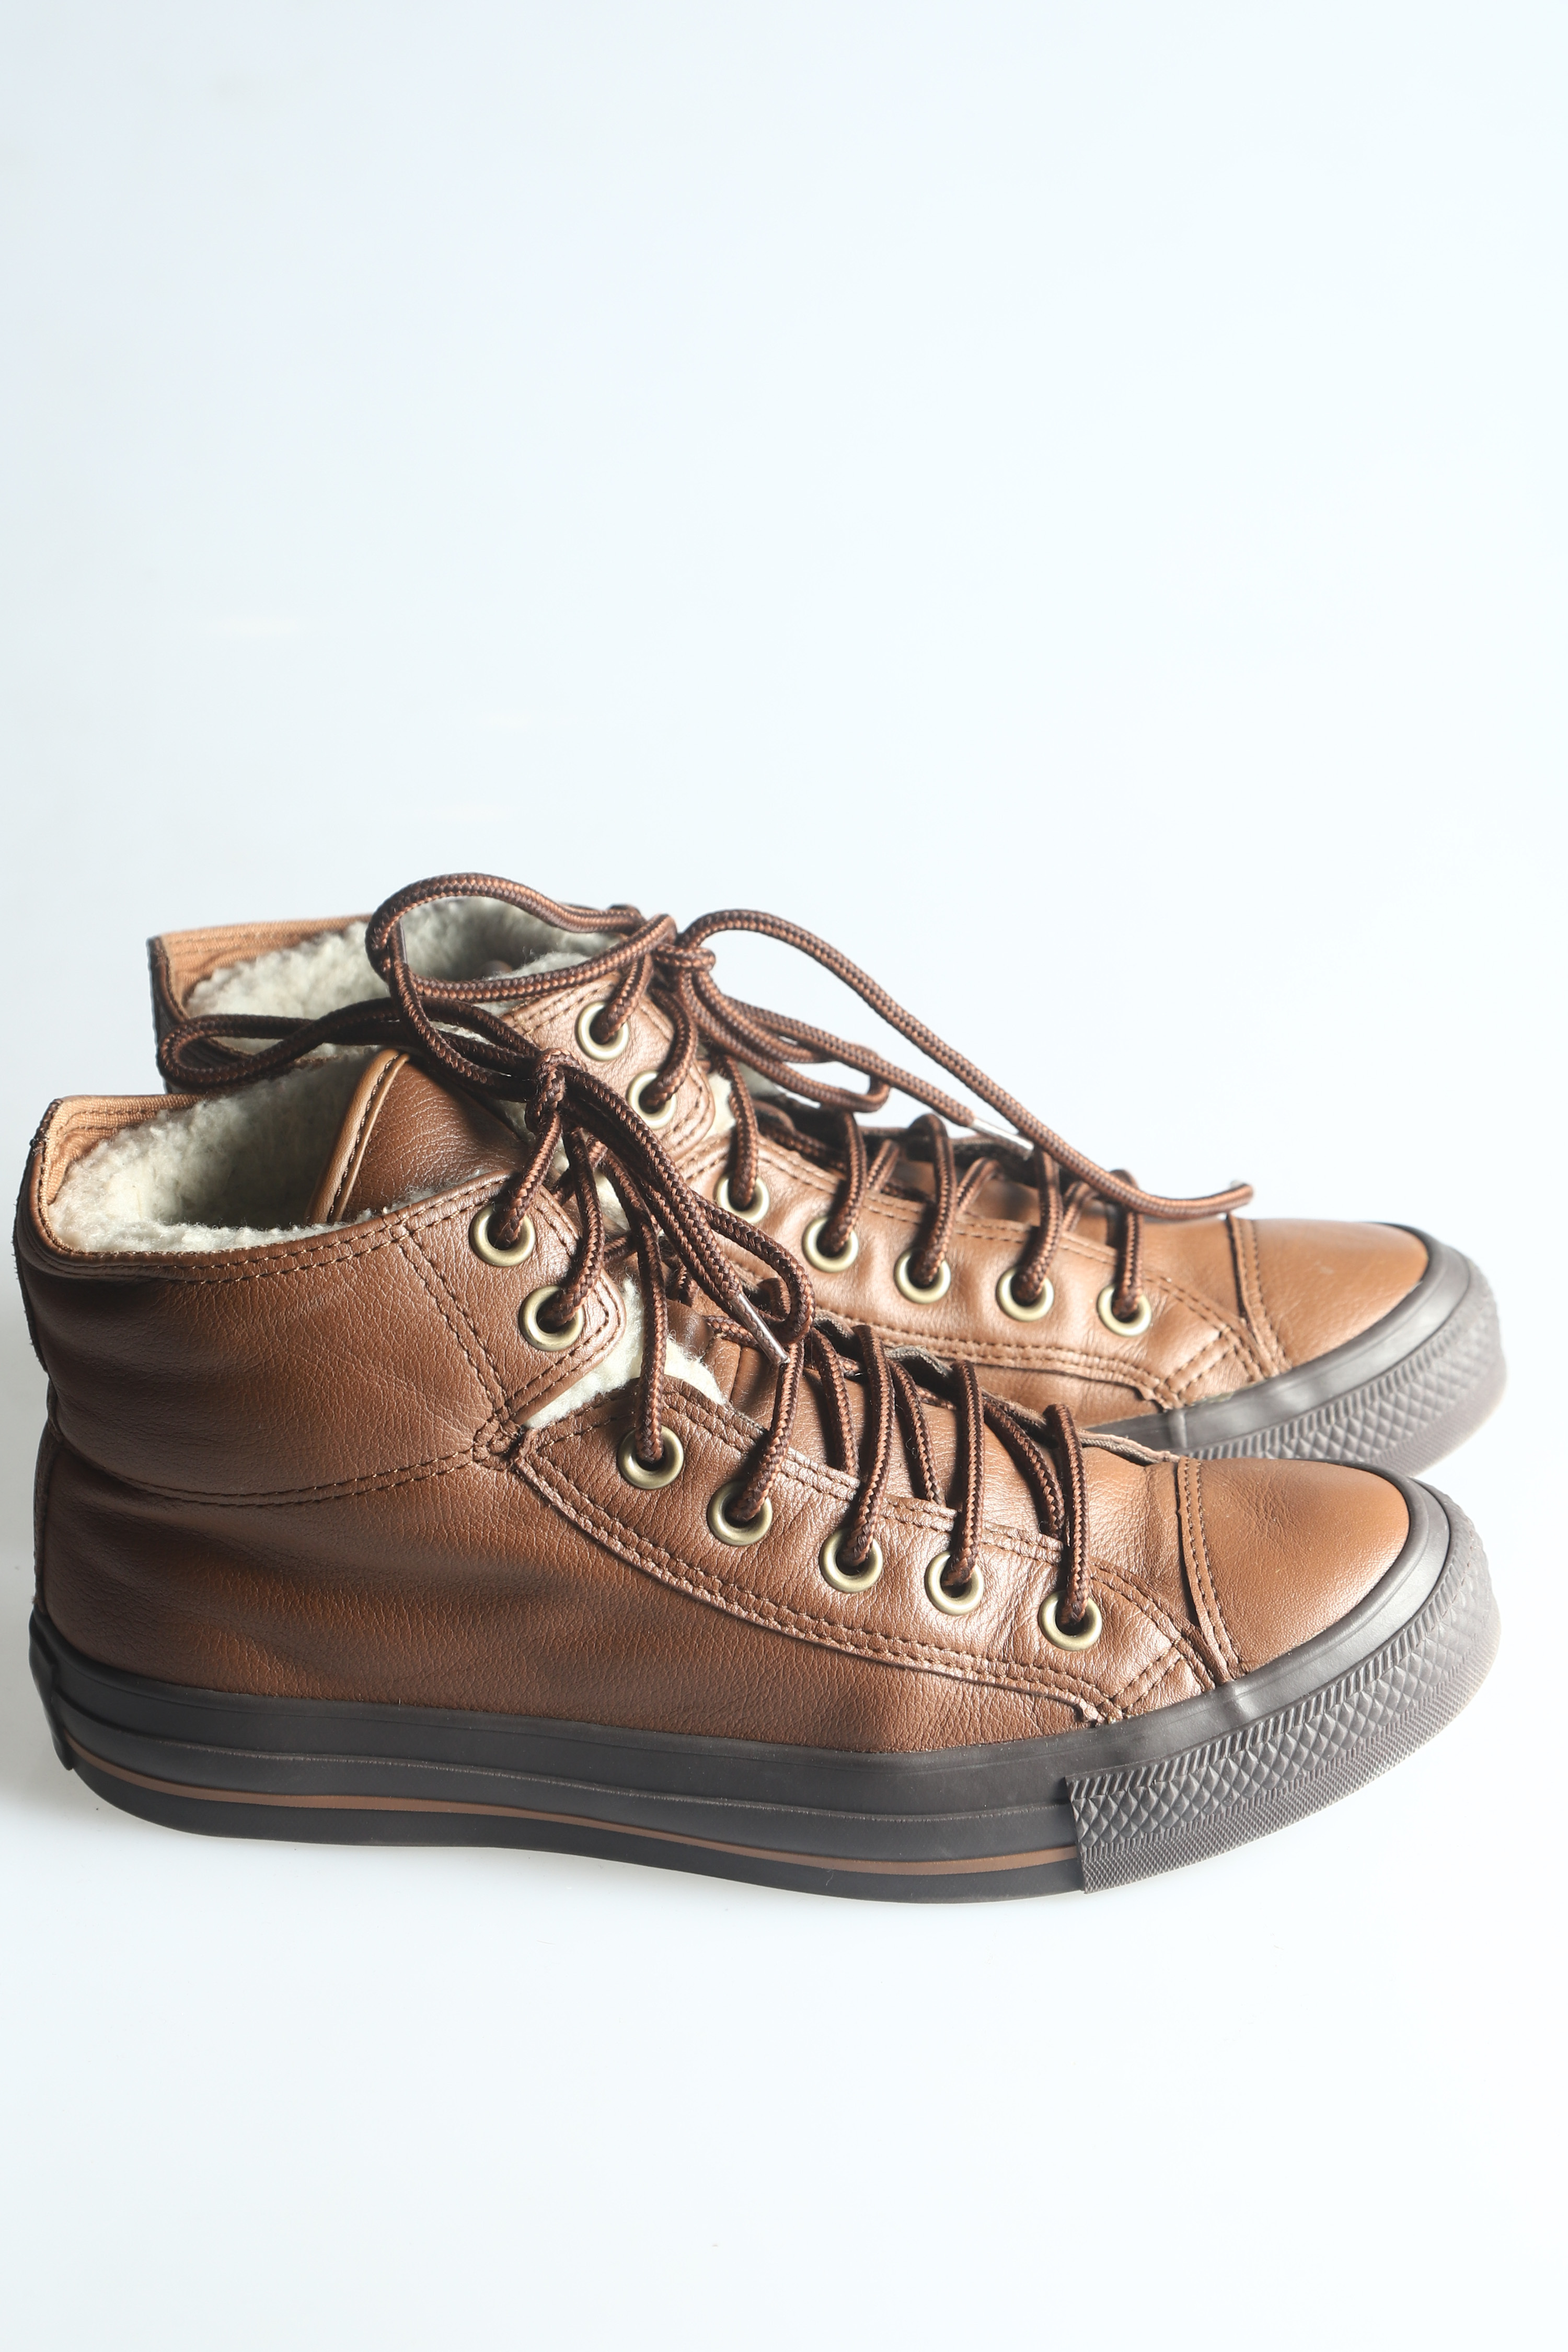 Brown Leather Converse All Star Shoes